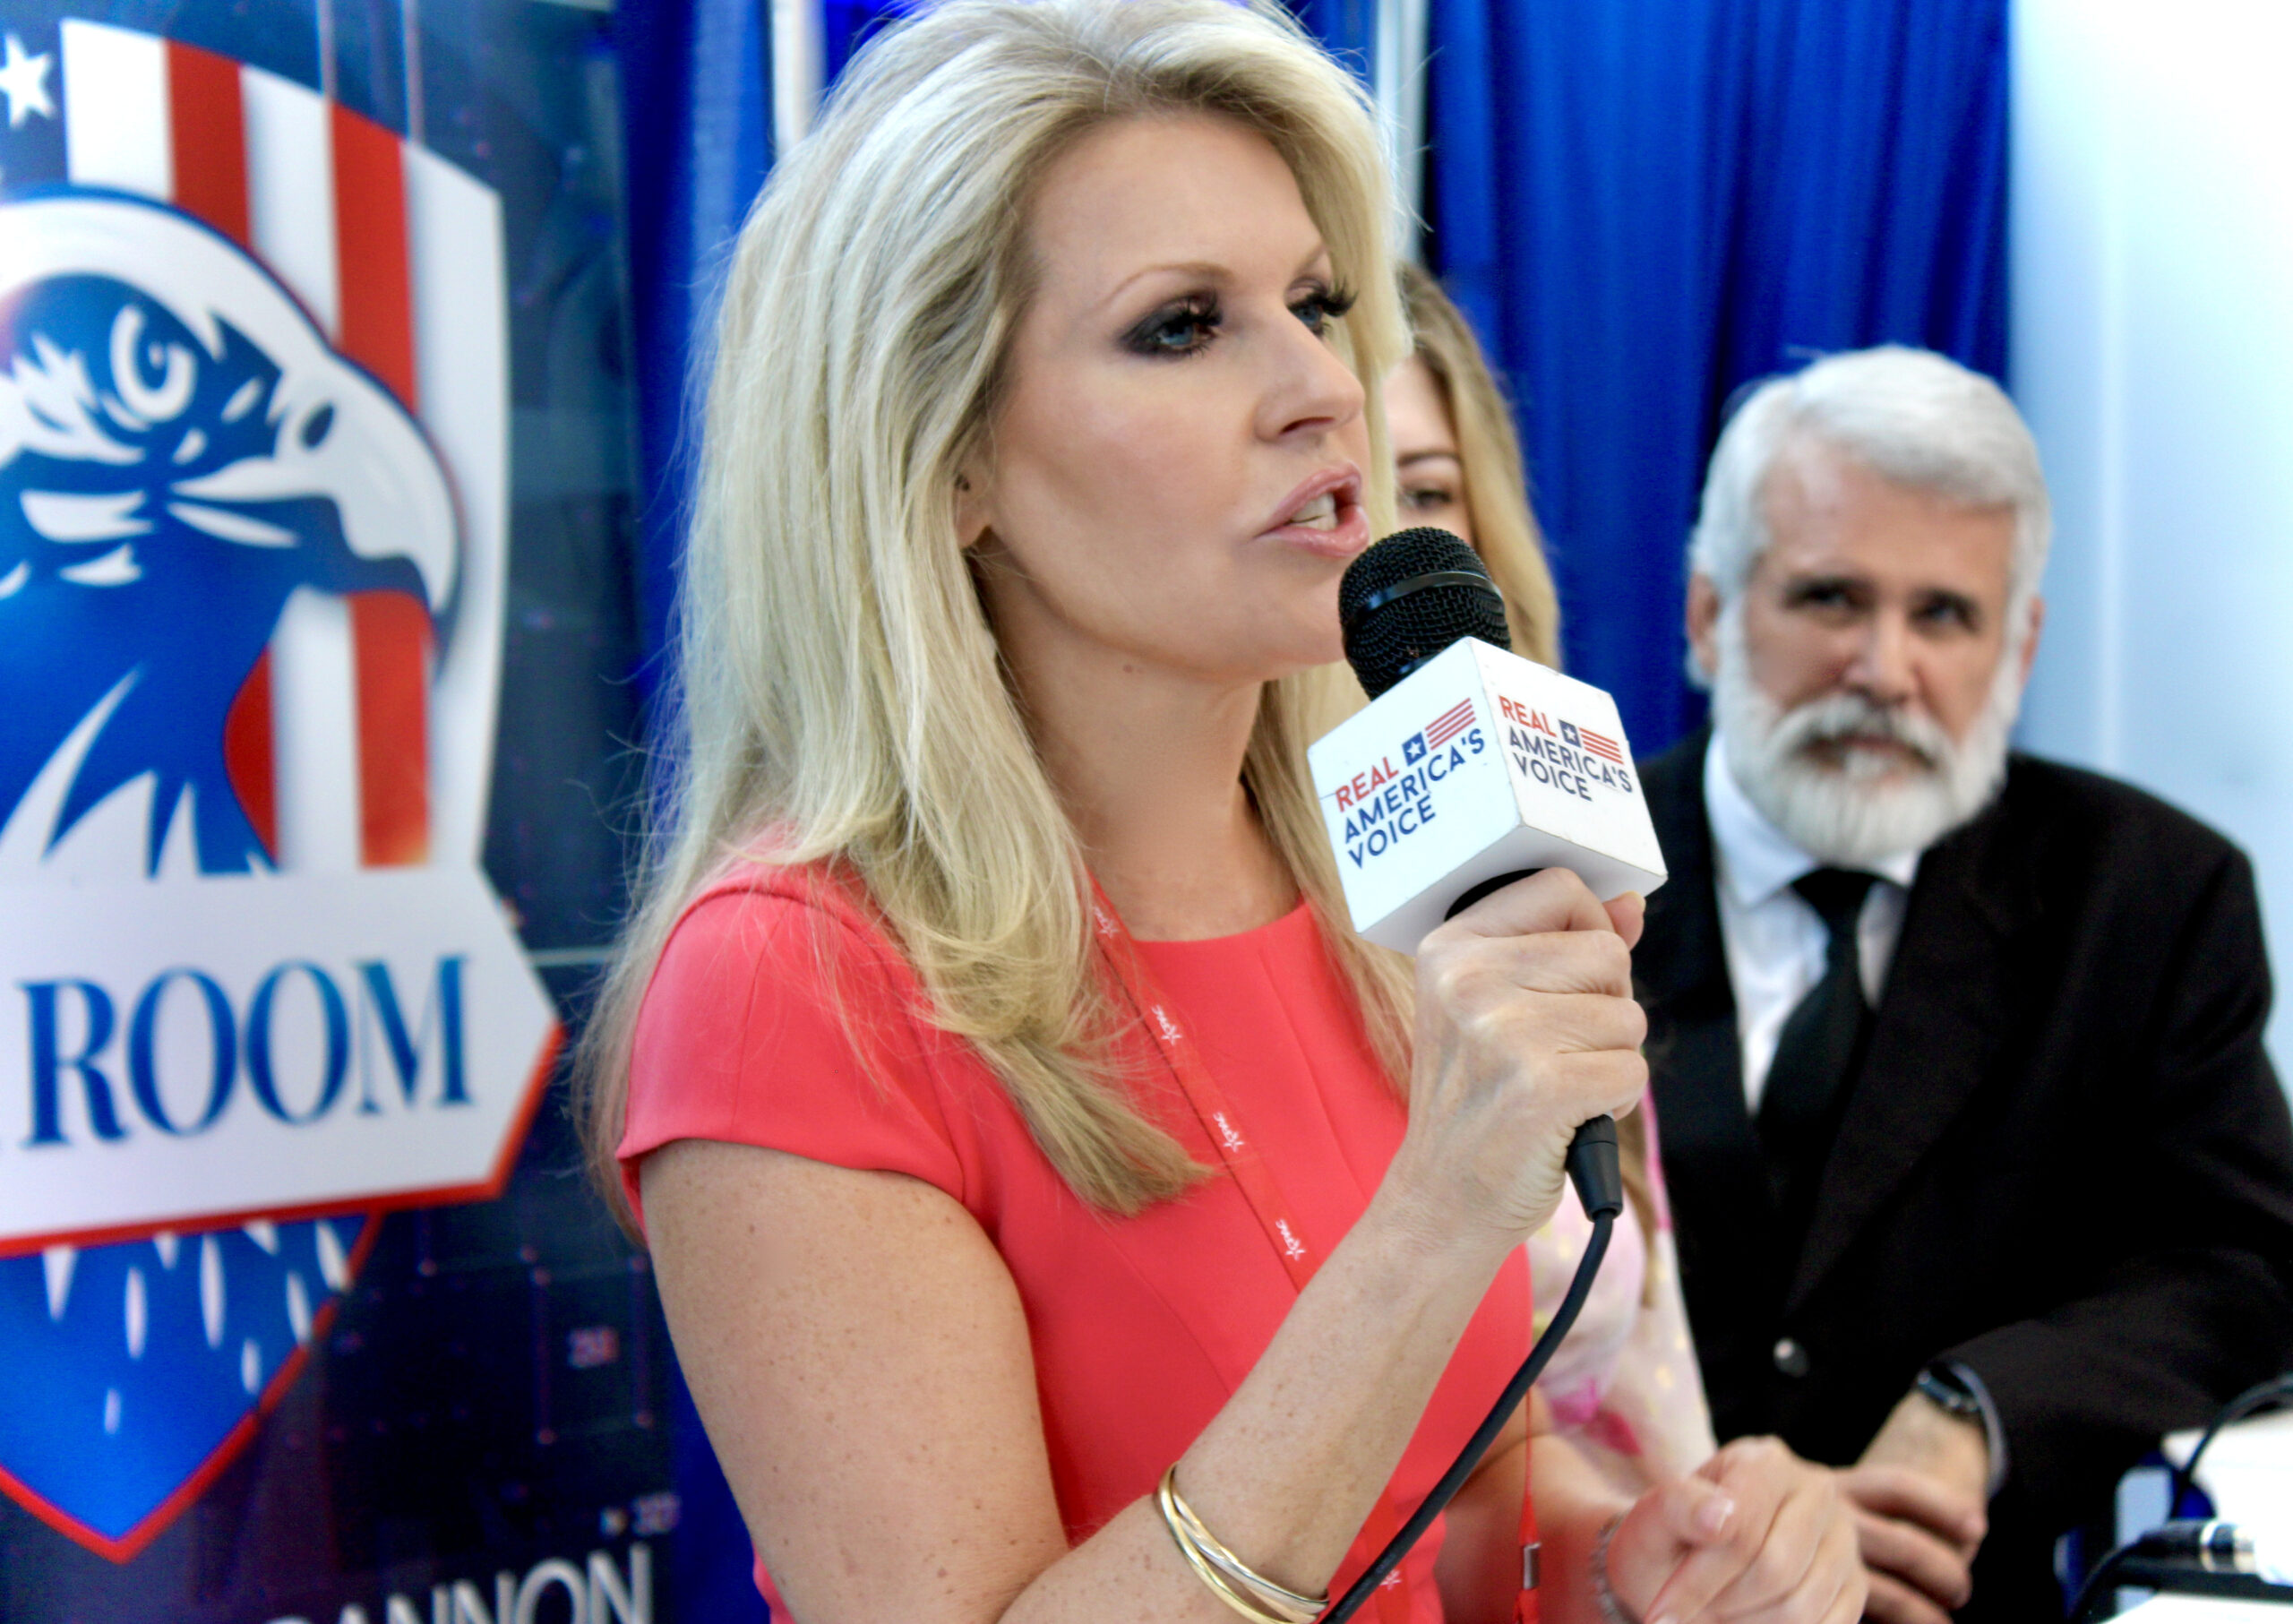 Monica Crowley: “The American taxpayer has pumped more than 0 billion into the war in Ukraine.”